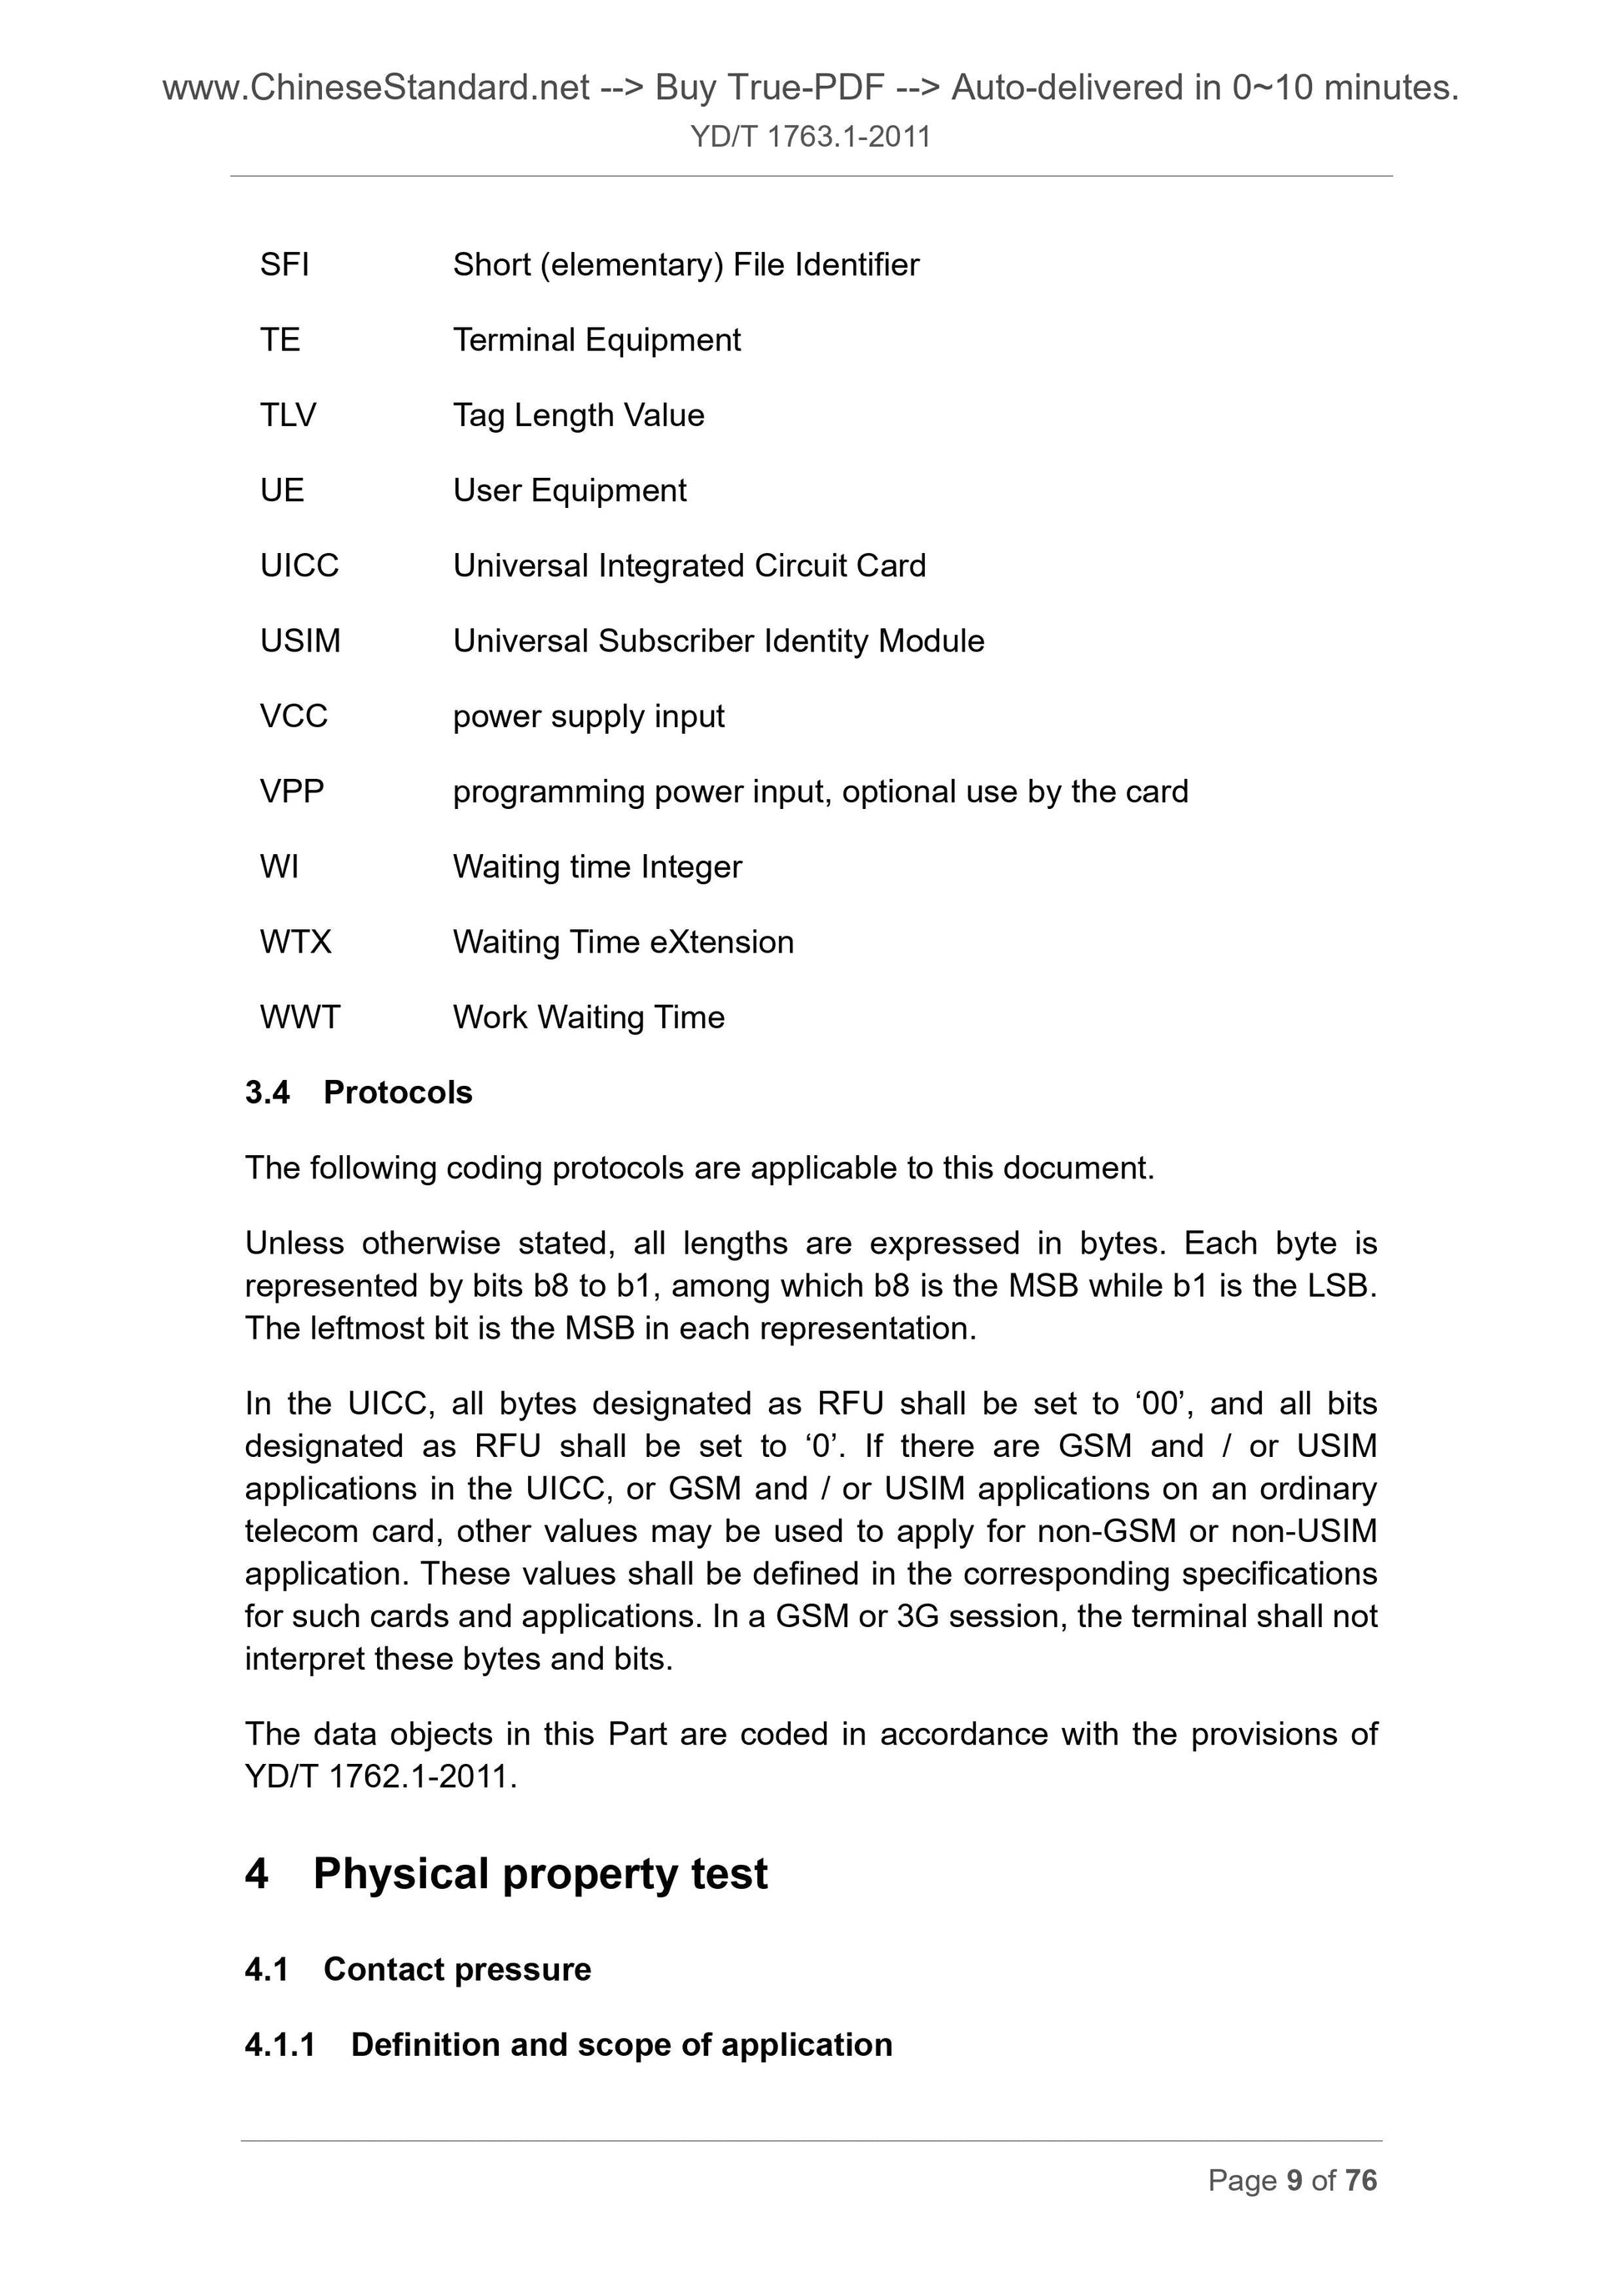 YD/T 1763.1-2011 Page 6